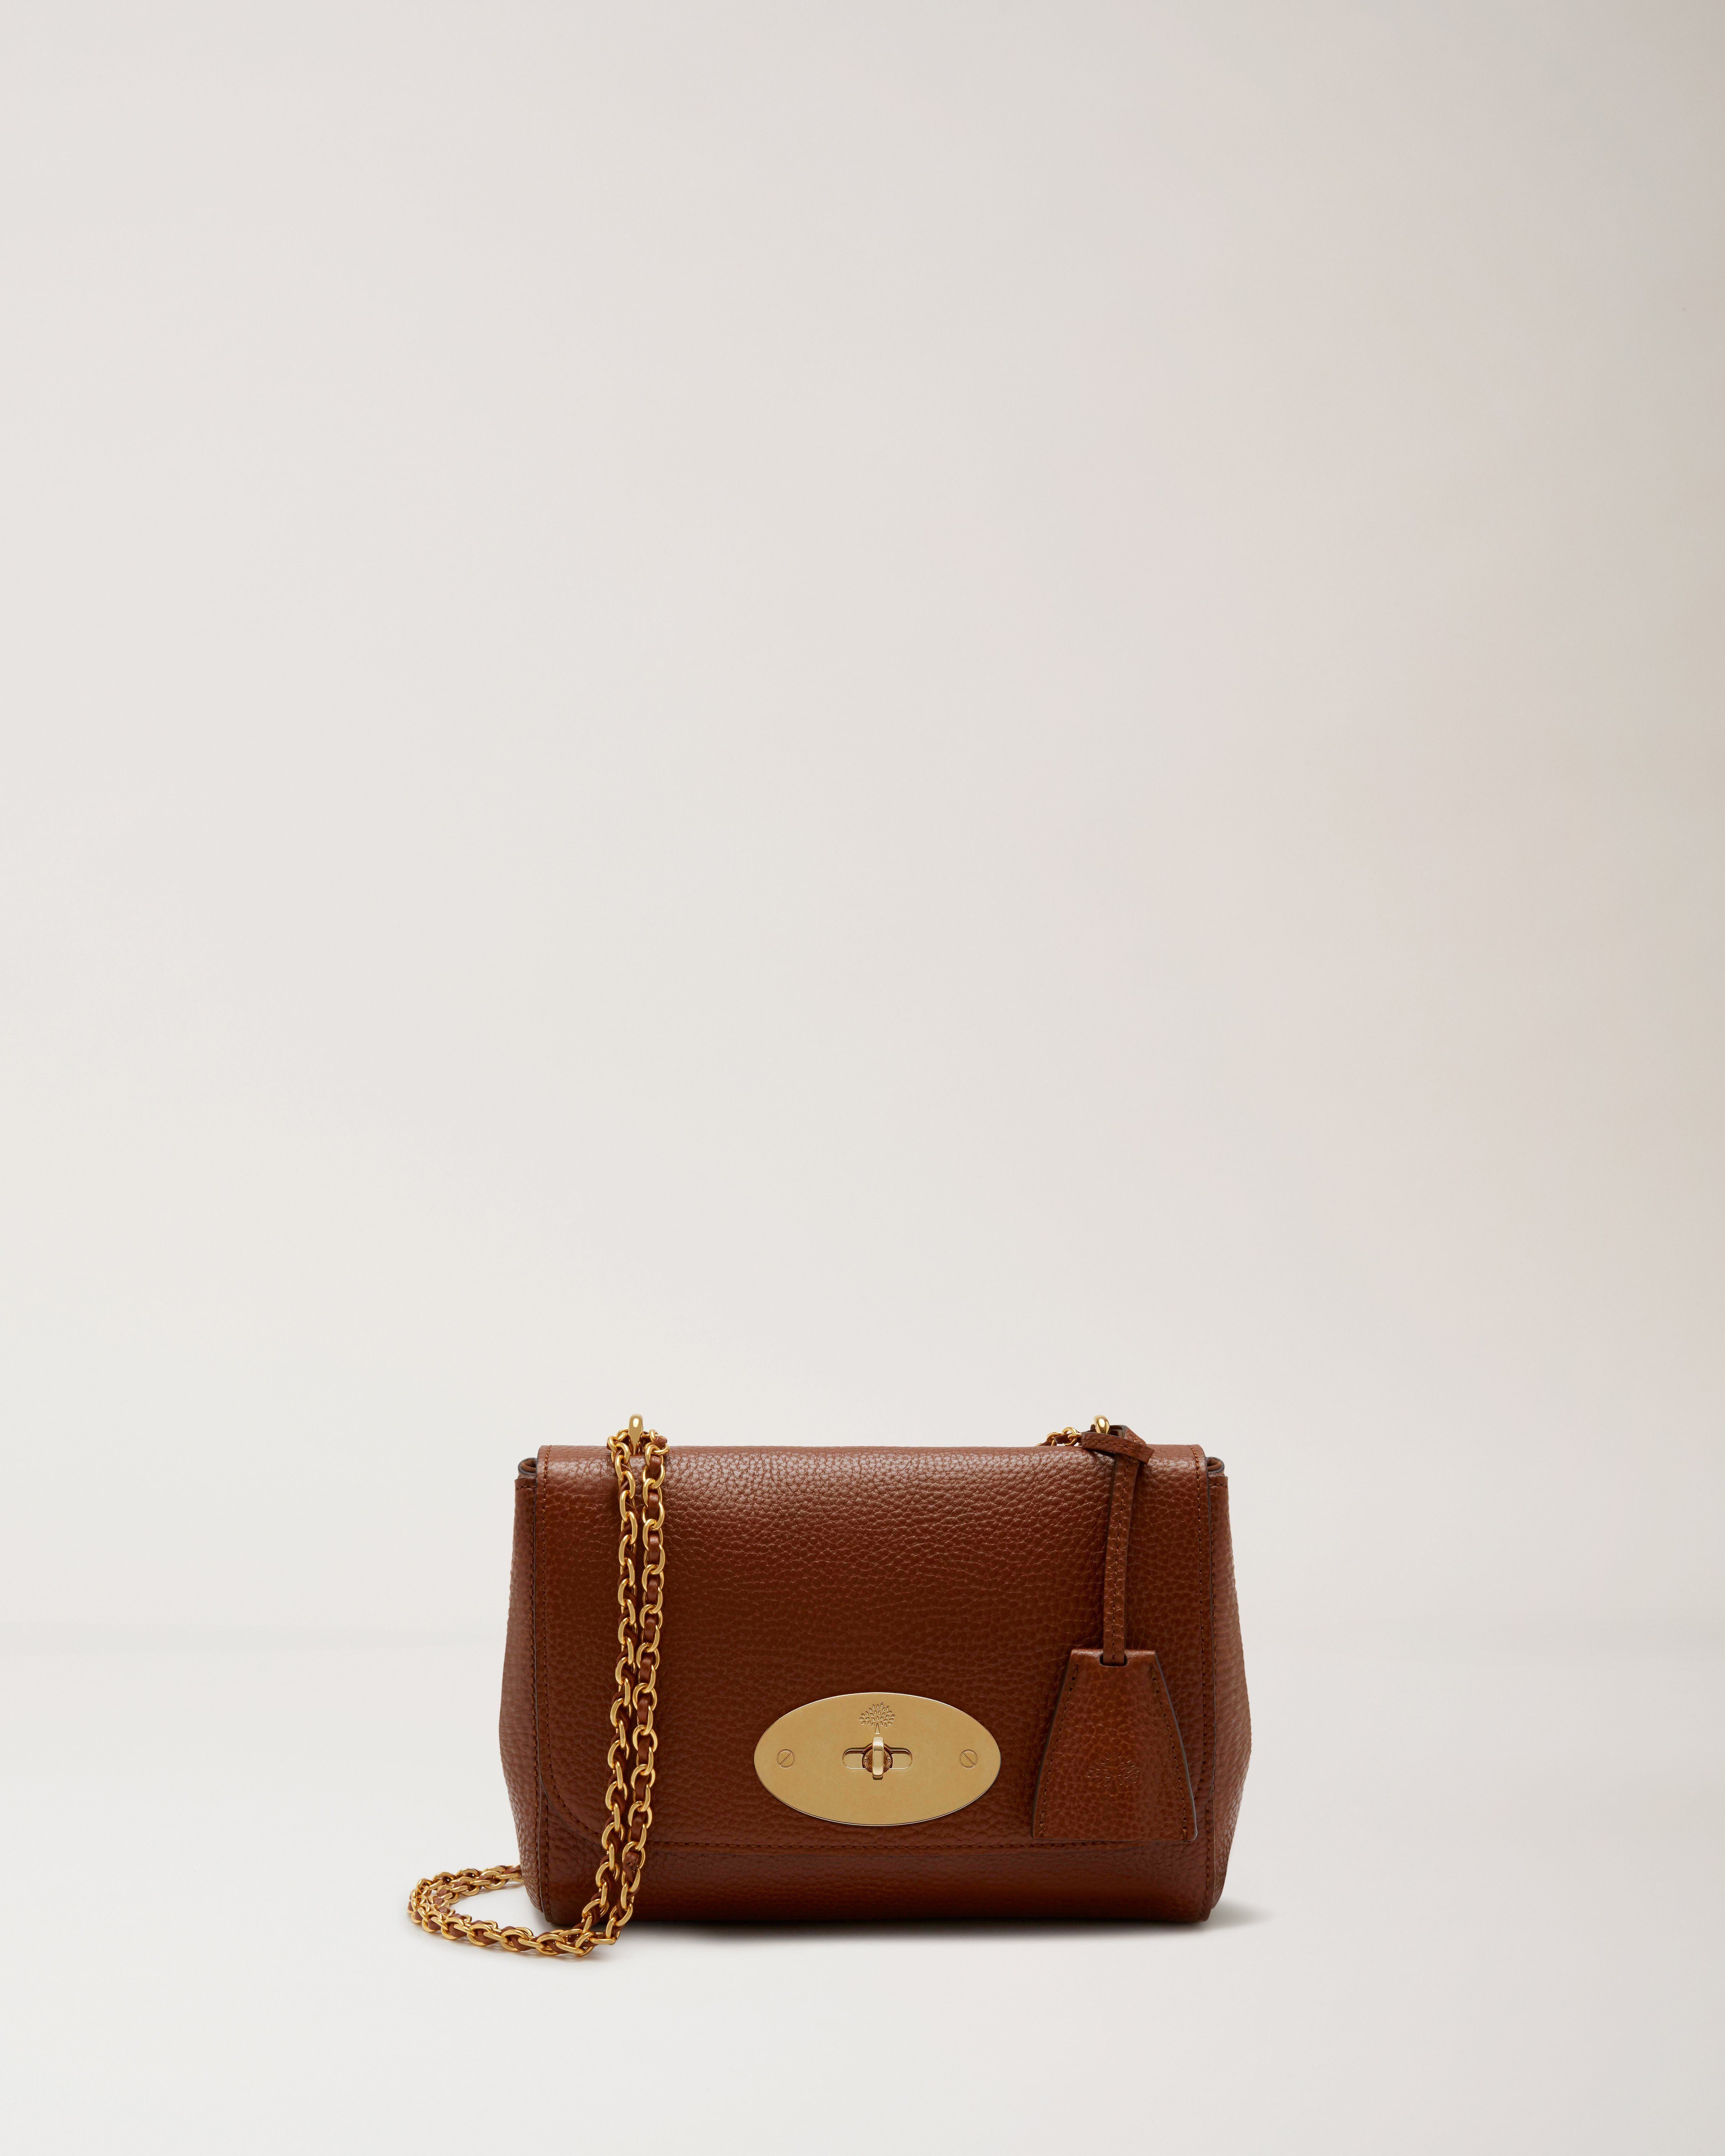 Mulberry Lily bag in Oak